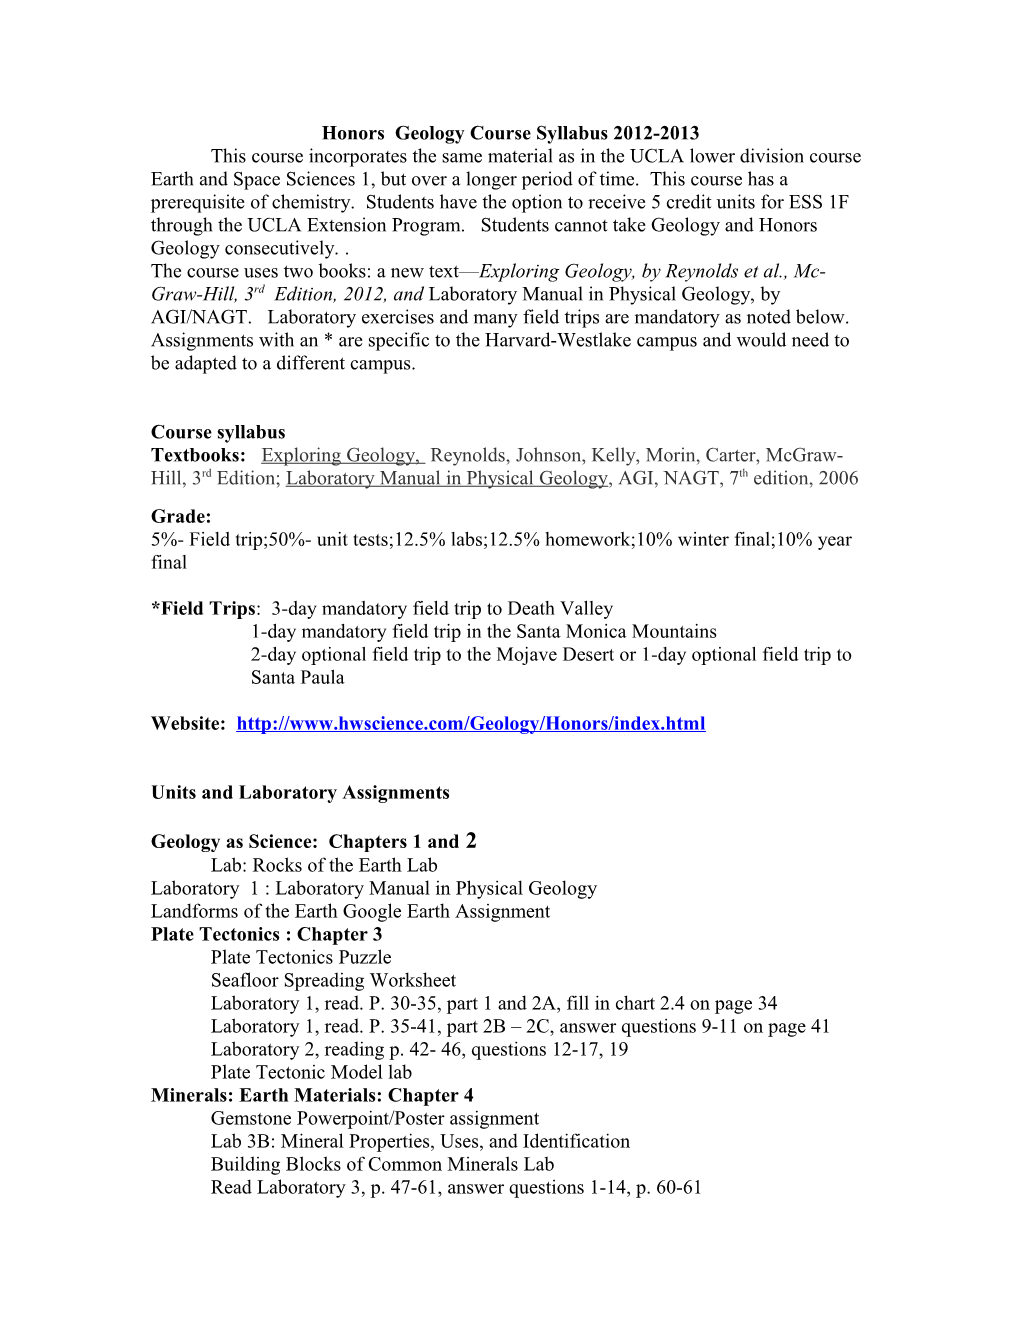 Honors Geology Course Syllabus 2008-2009